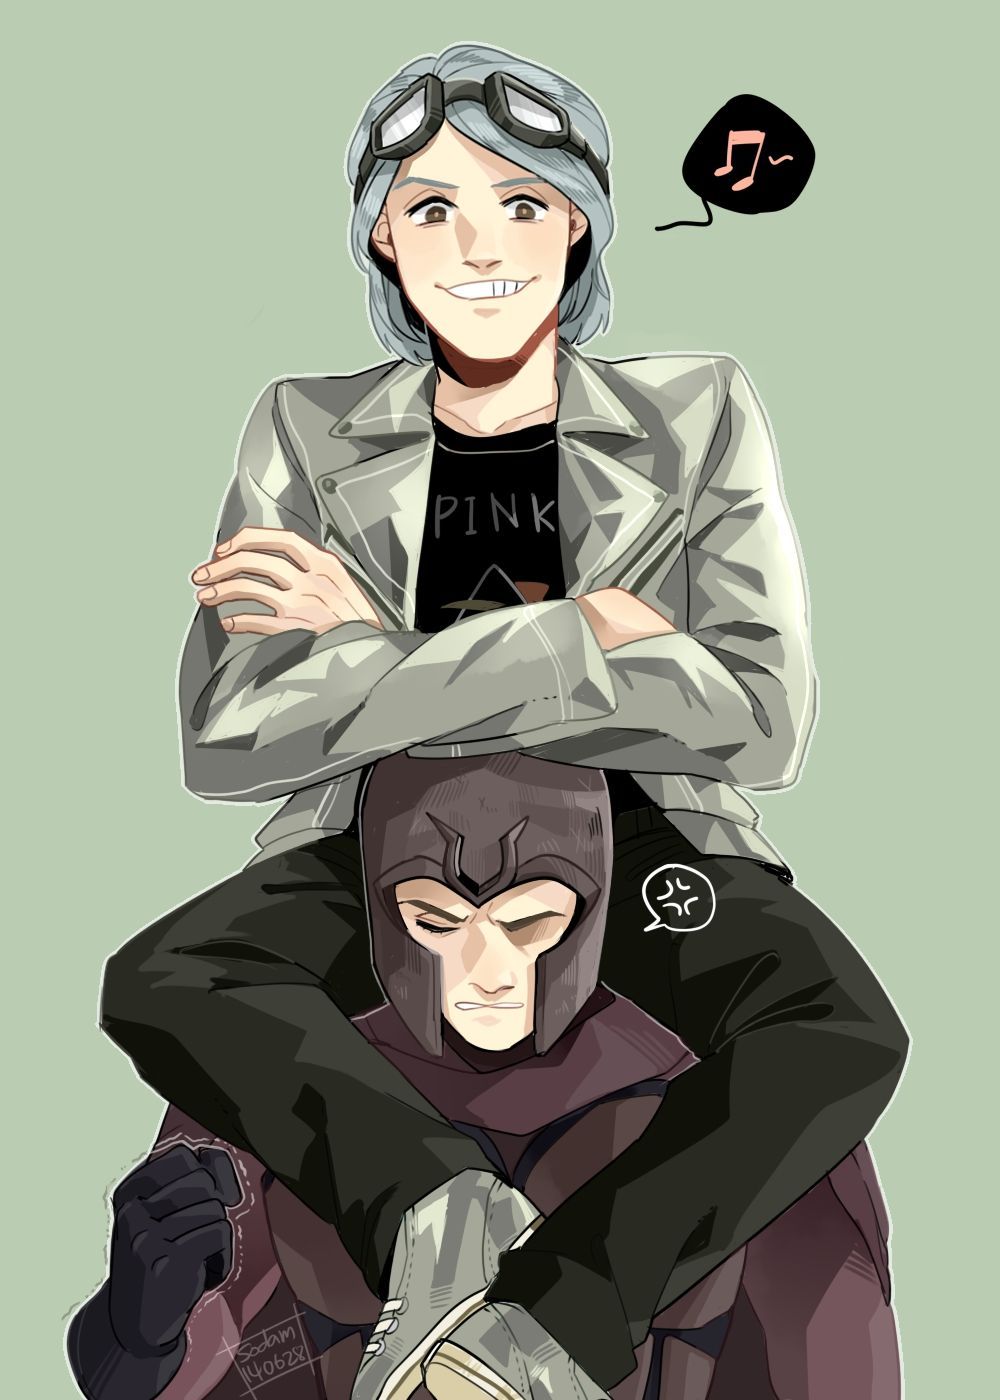 Quicksilver and his dad Magneto<-- I have no idea who they are